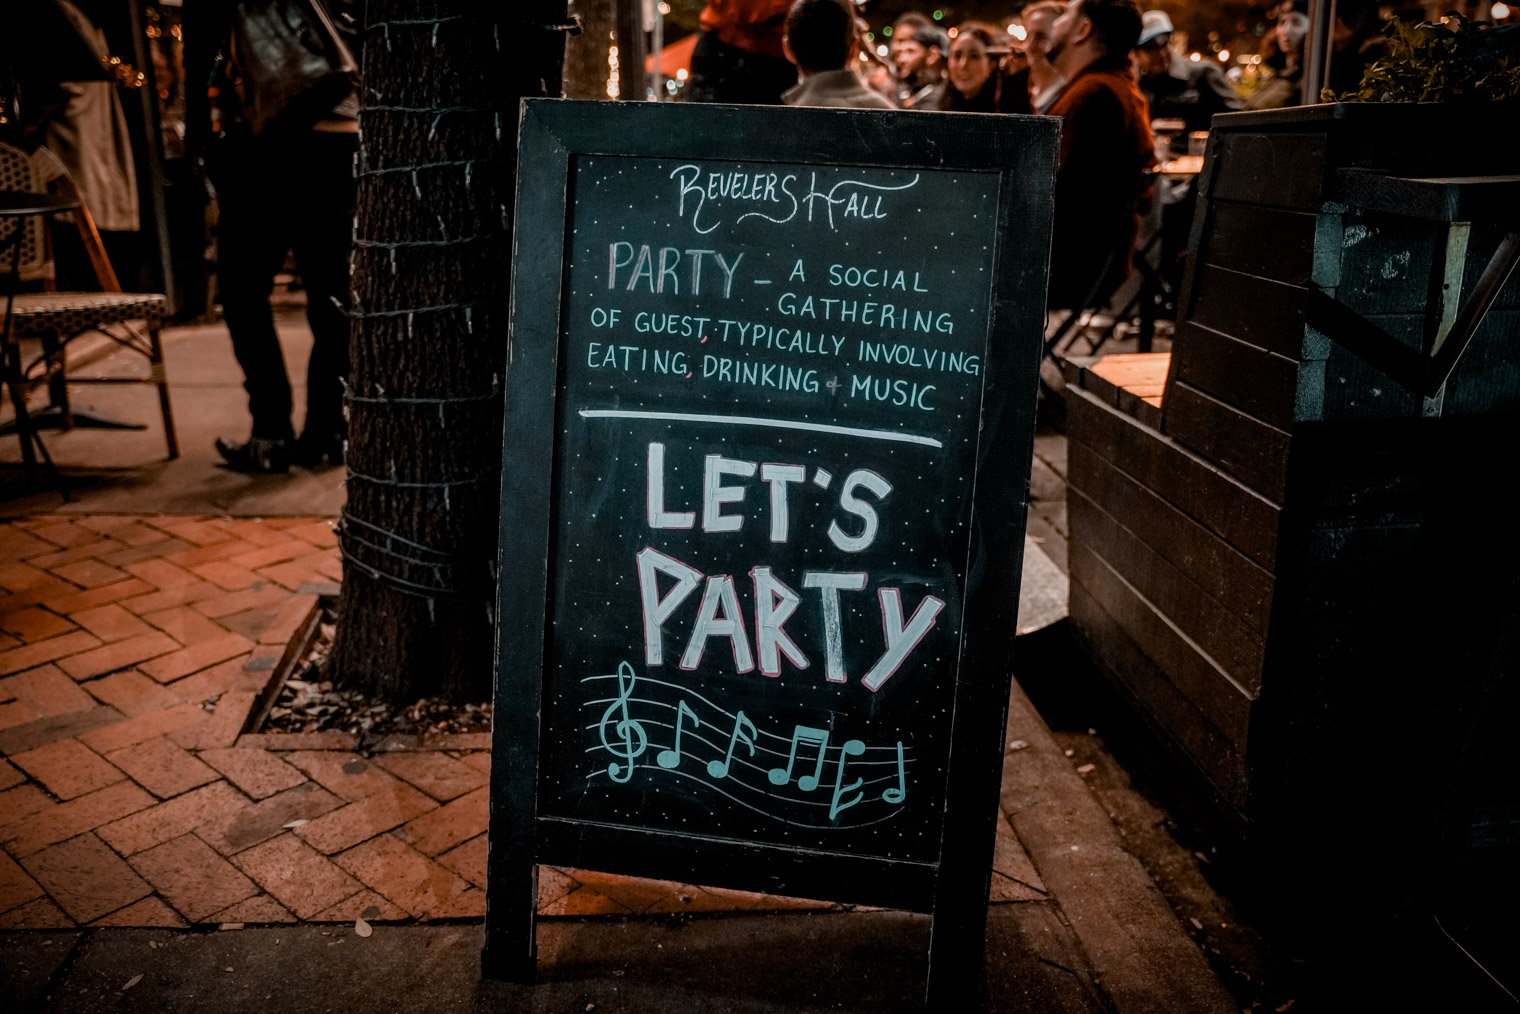 A sign that says "Let's Party"